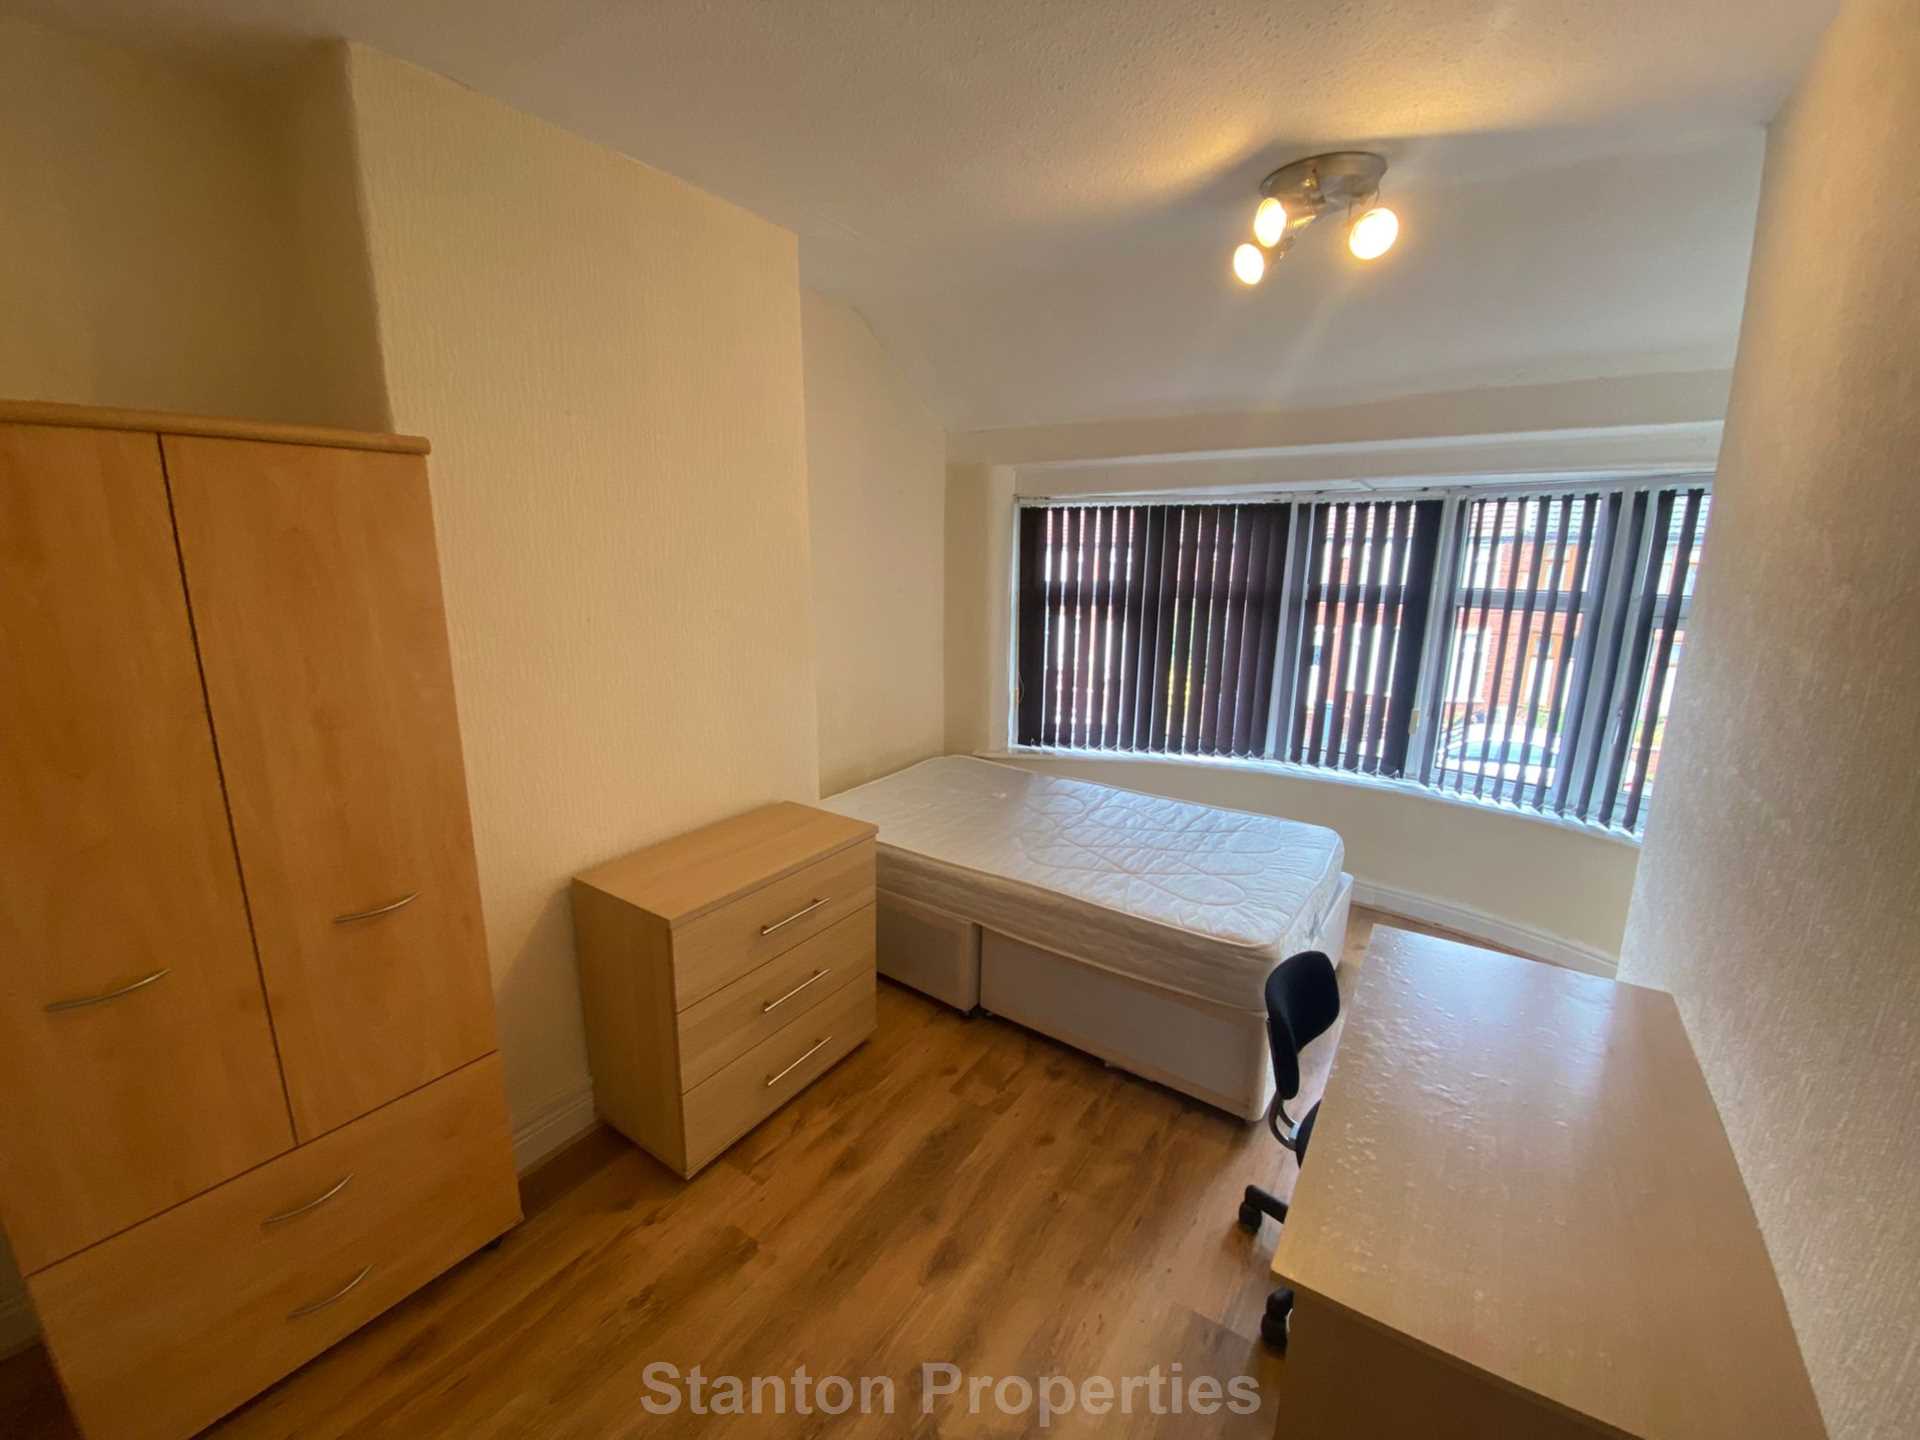 £120 pppw, Weld Road, Withington, Image 11